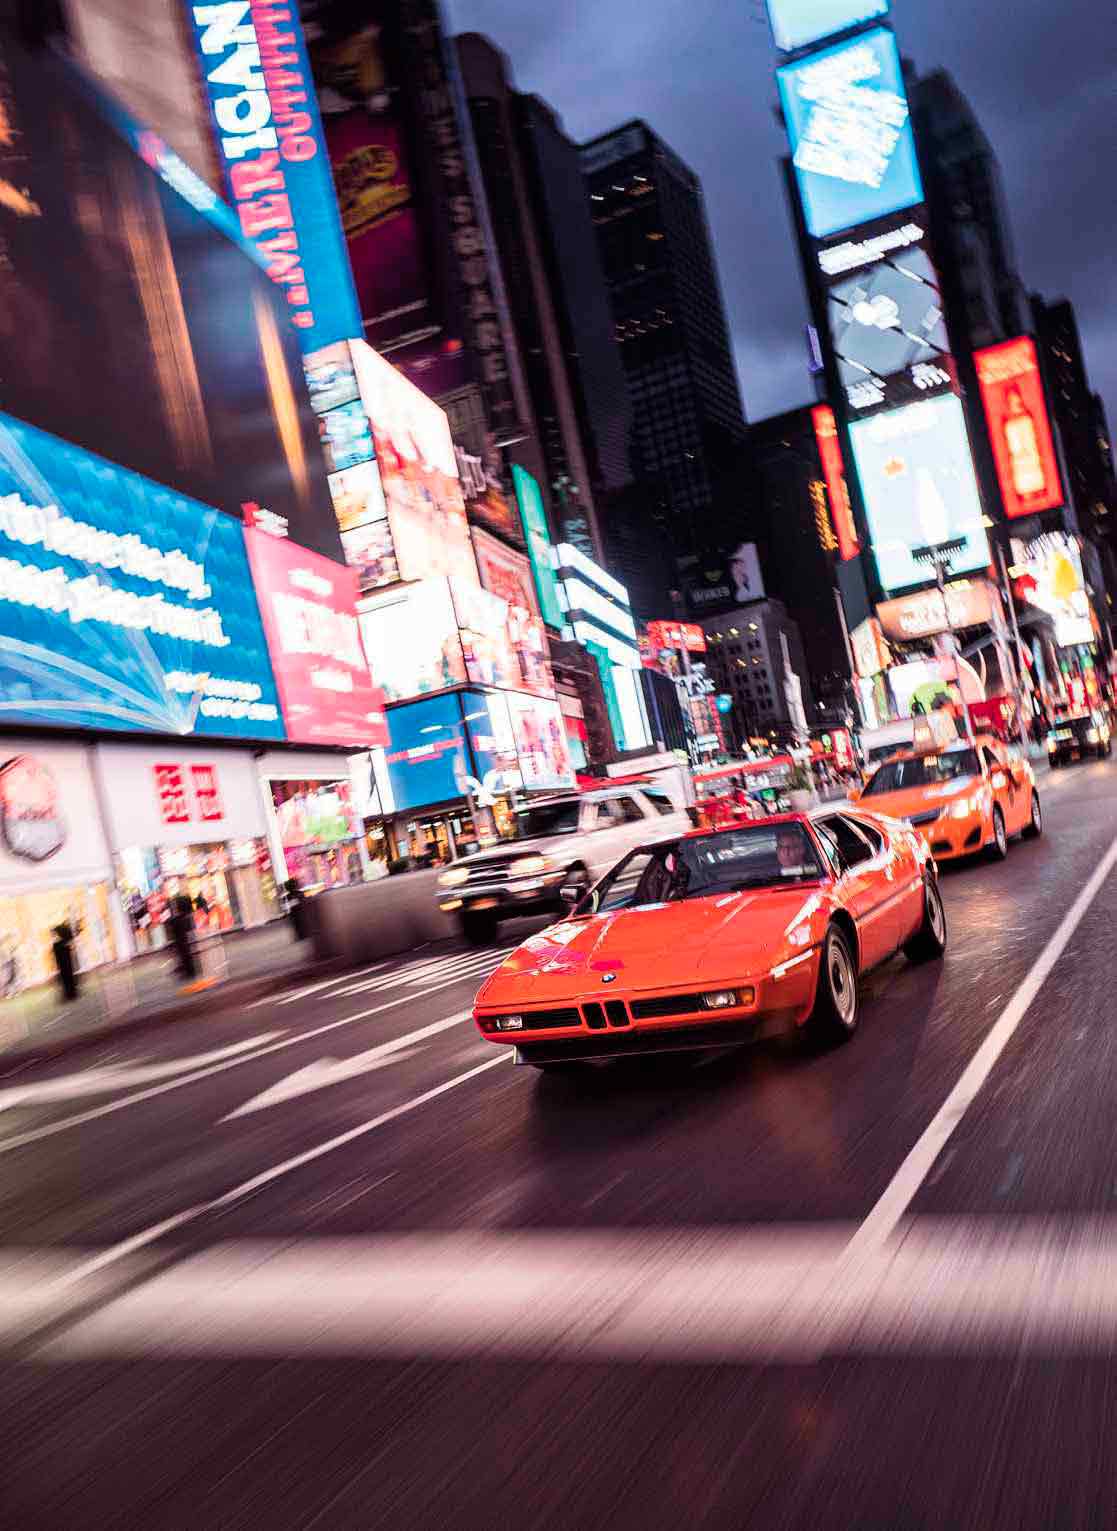 1981 BMW M1 E26 on New York’s streets driven